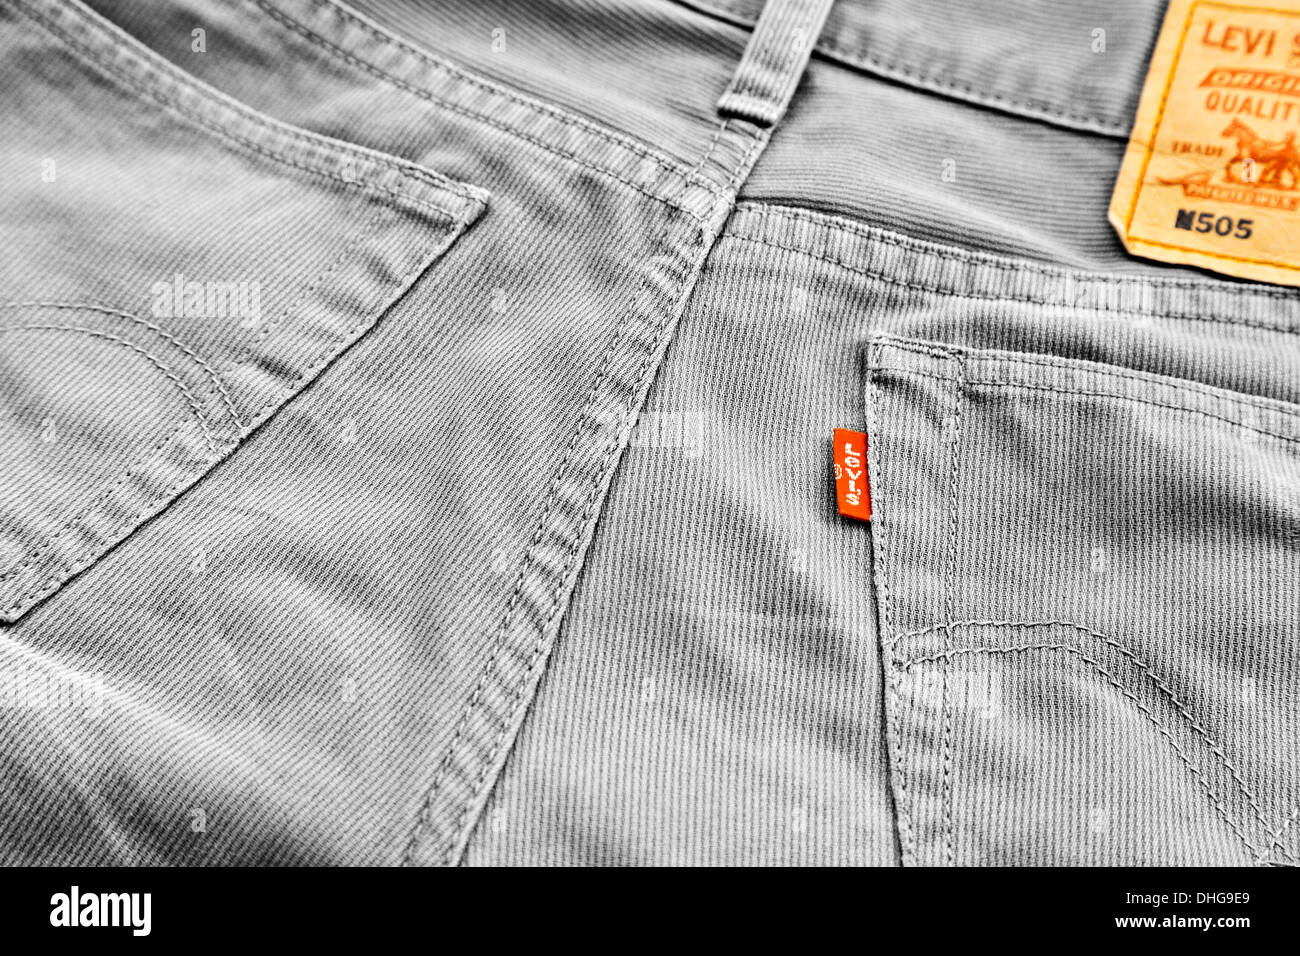 Desaturate image of a men's Levi's 505 jeans with close up of a Levi's Red  Tab Stock Photo - Alamy